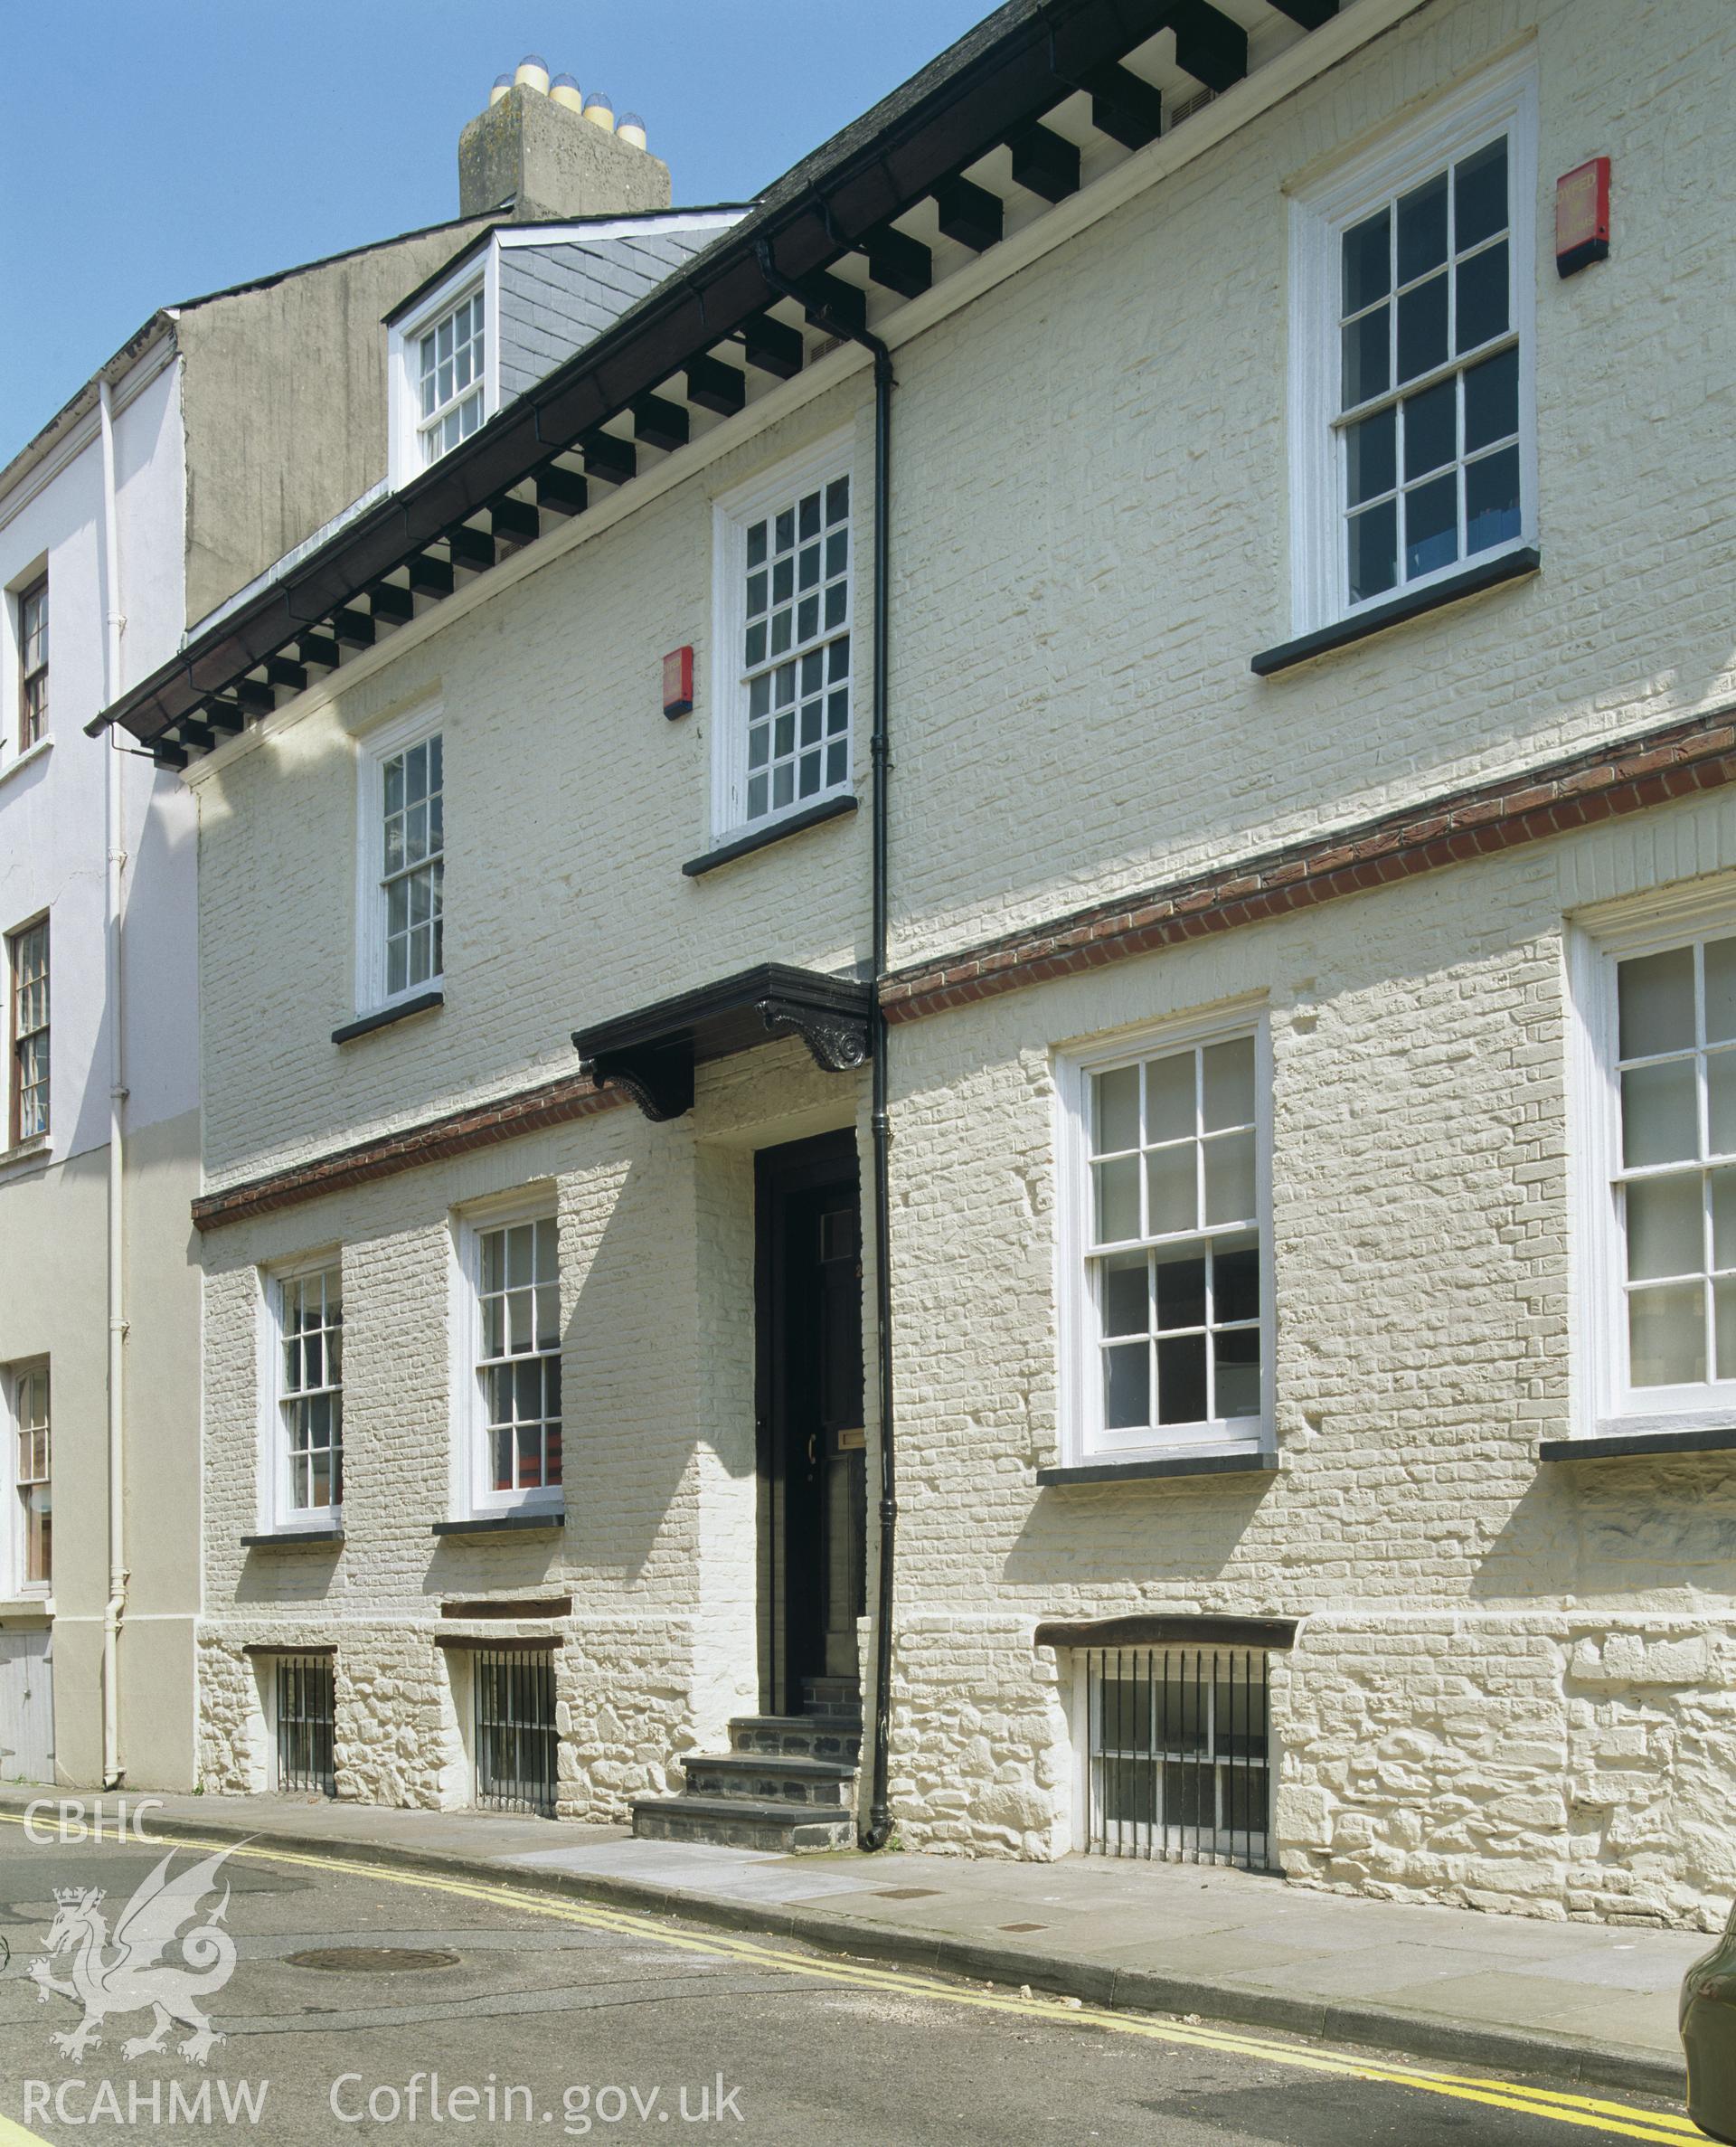 Colour transparency showing 2-3 Quay Street, Carmarthen, produced by Iain Wright, June 2004